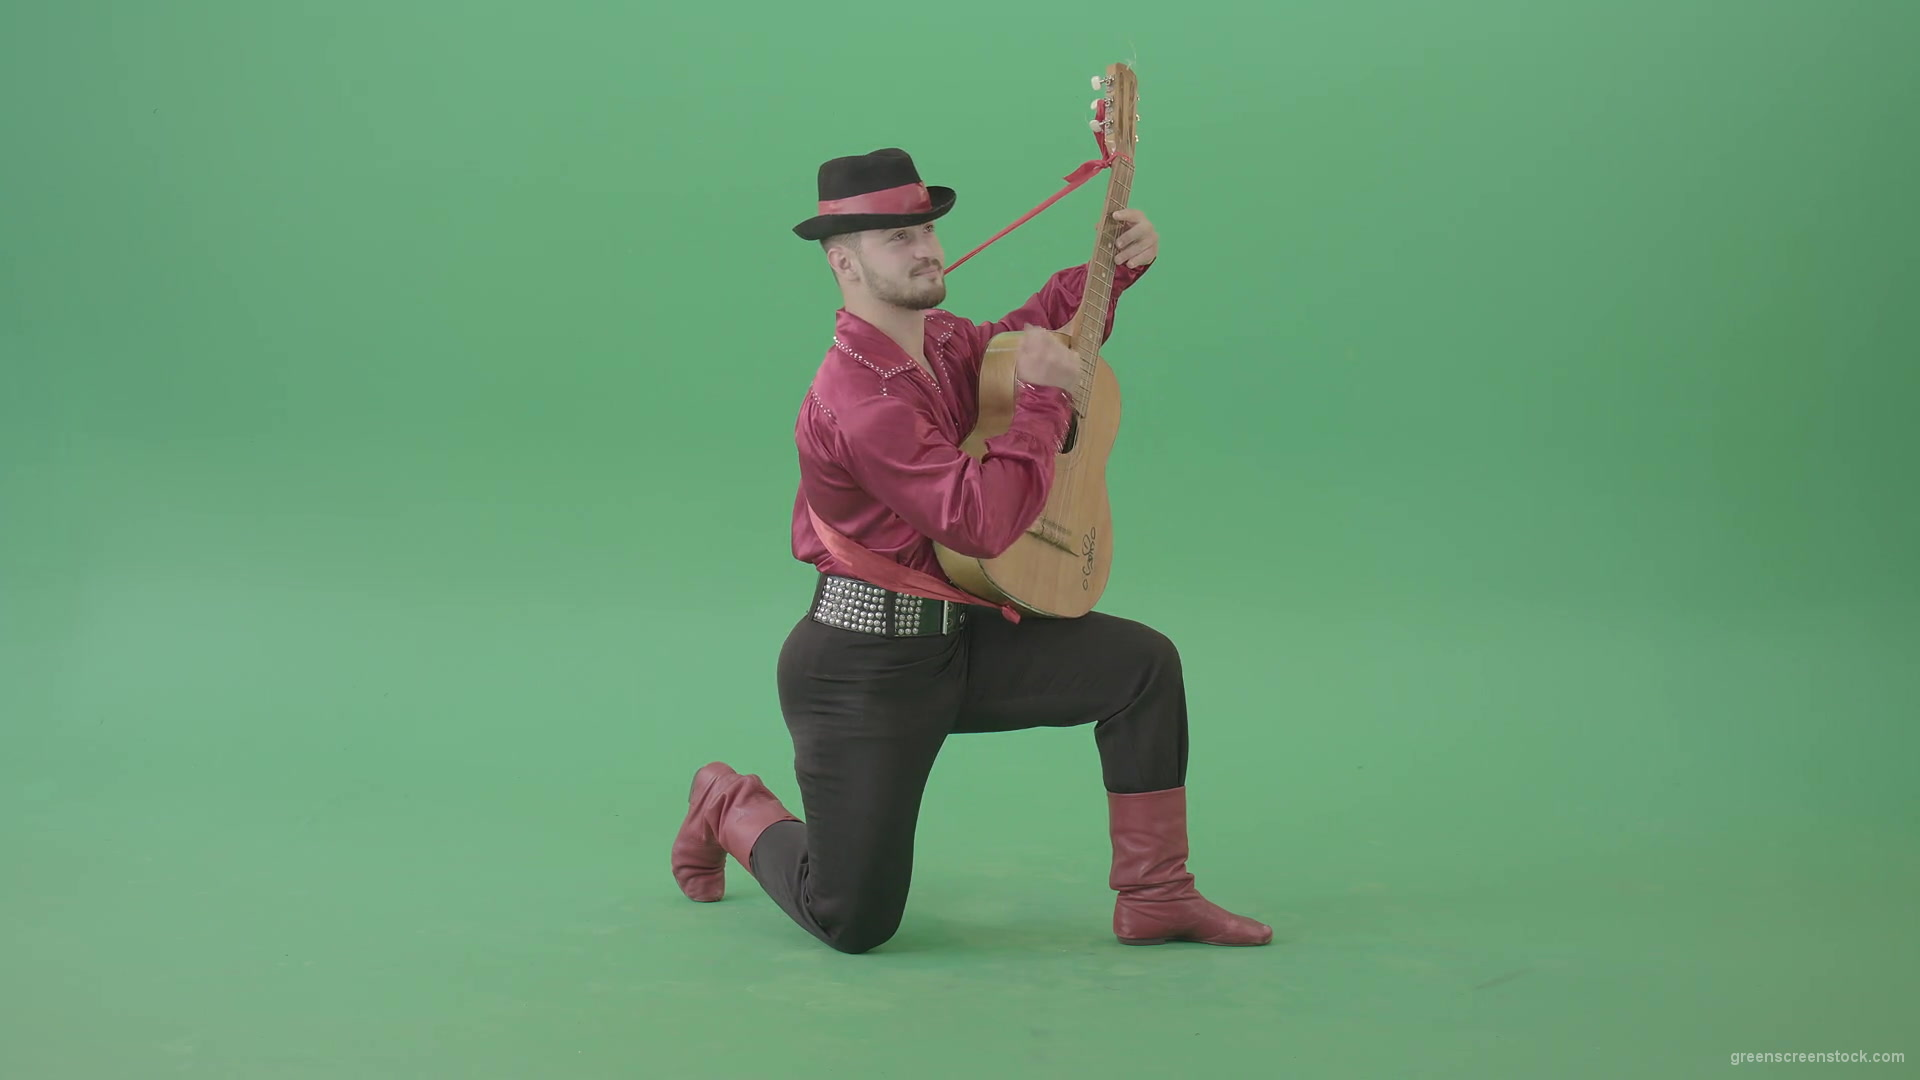 Man-in-Gipsy-costume-playing-love-song-on-guitar-isolated-on-green-screen-4K-Video-Footage-1920_009 Green Screen Stock